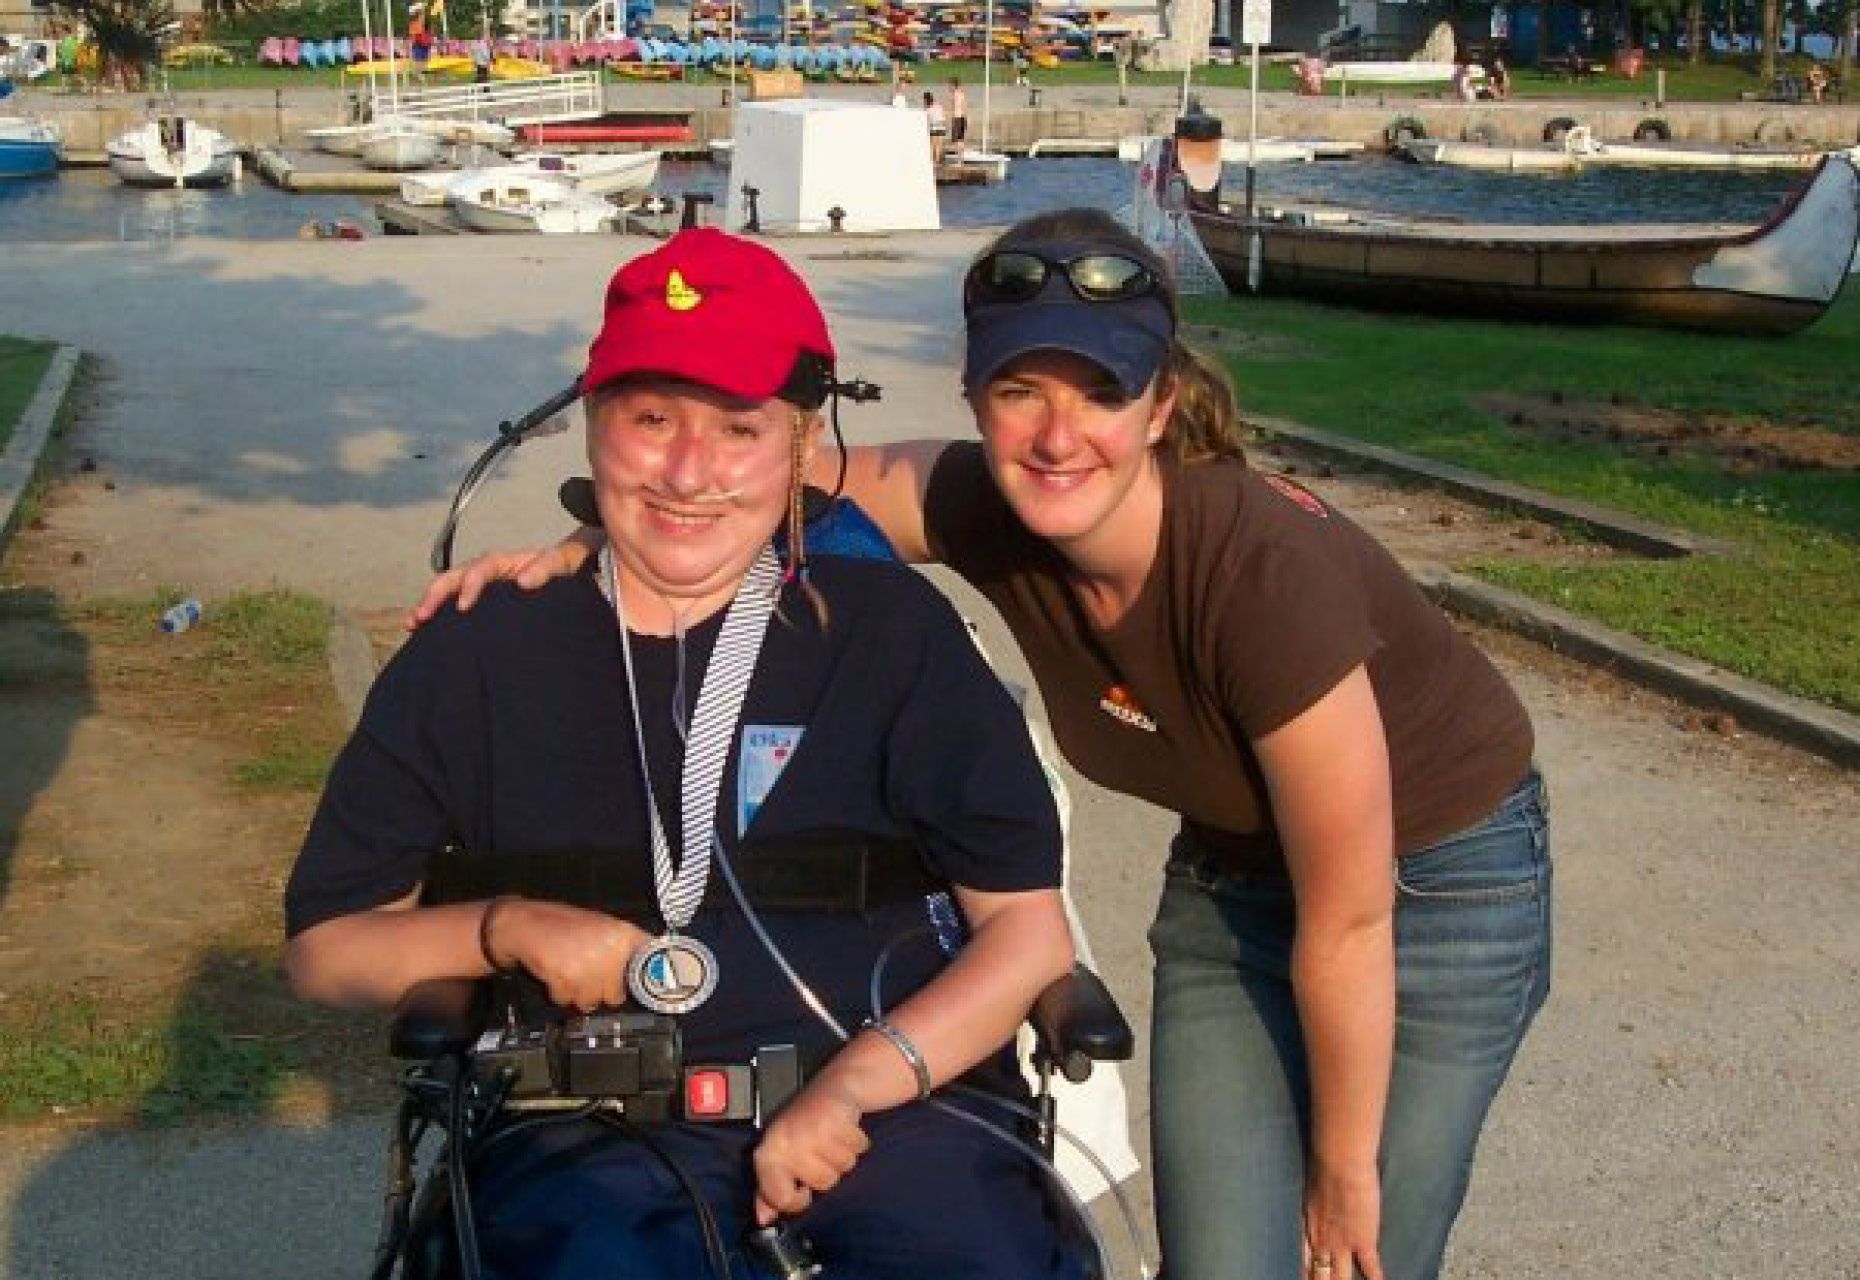 Jenny Davey standing next to Sylvie Séguin in wheelchair. Marina in background